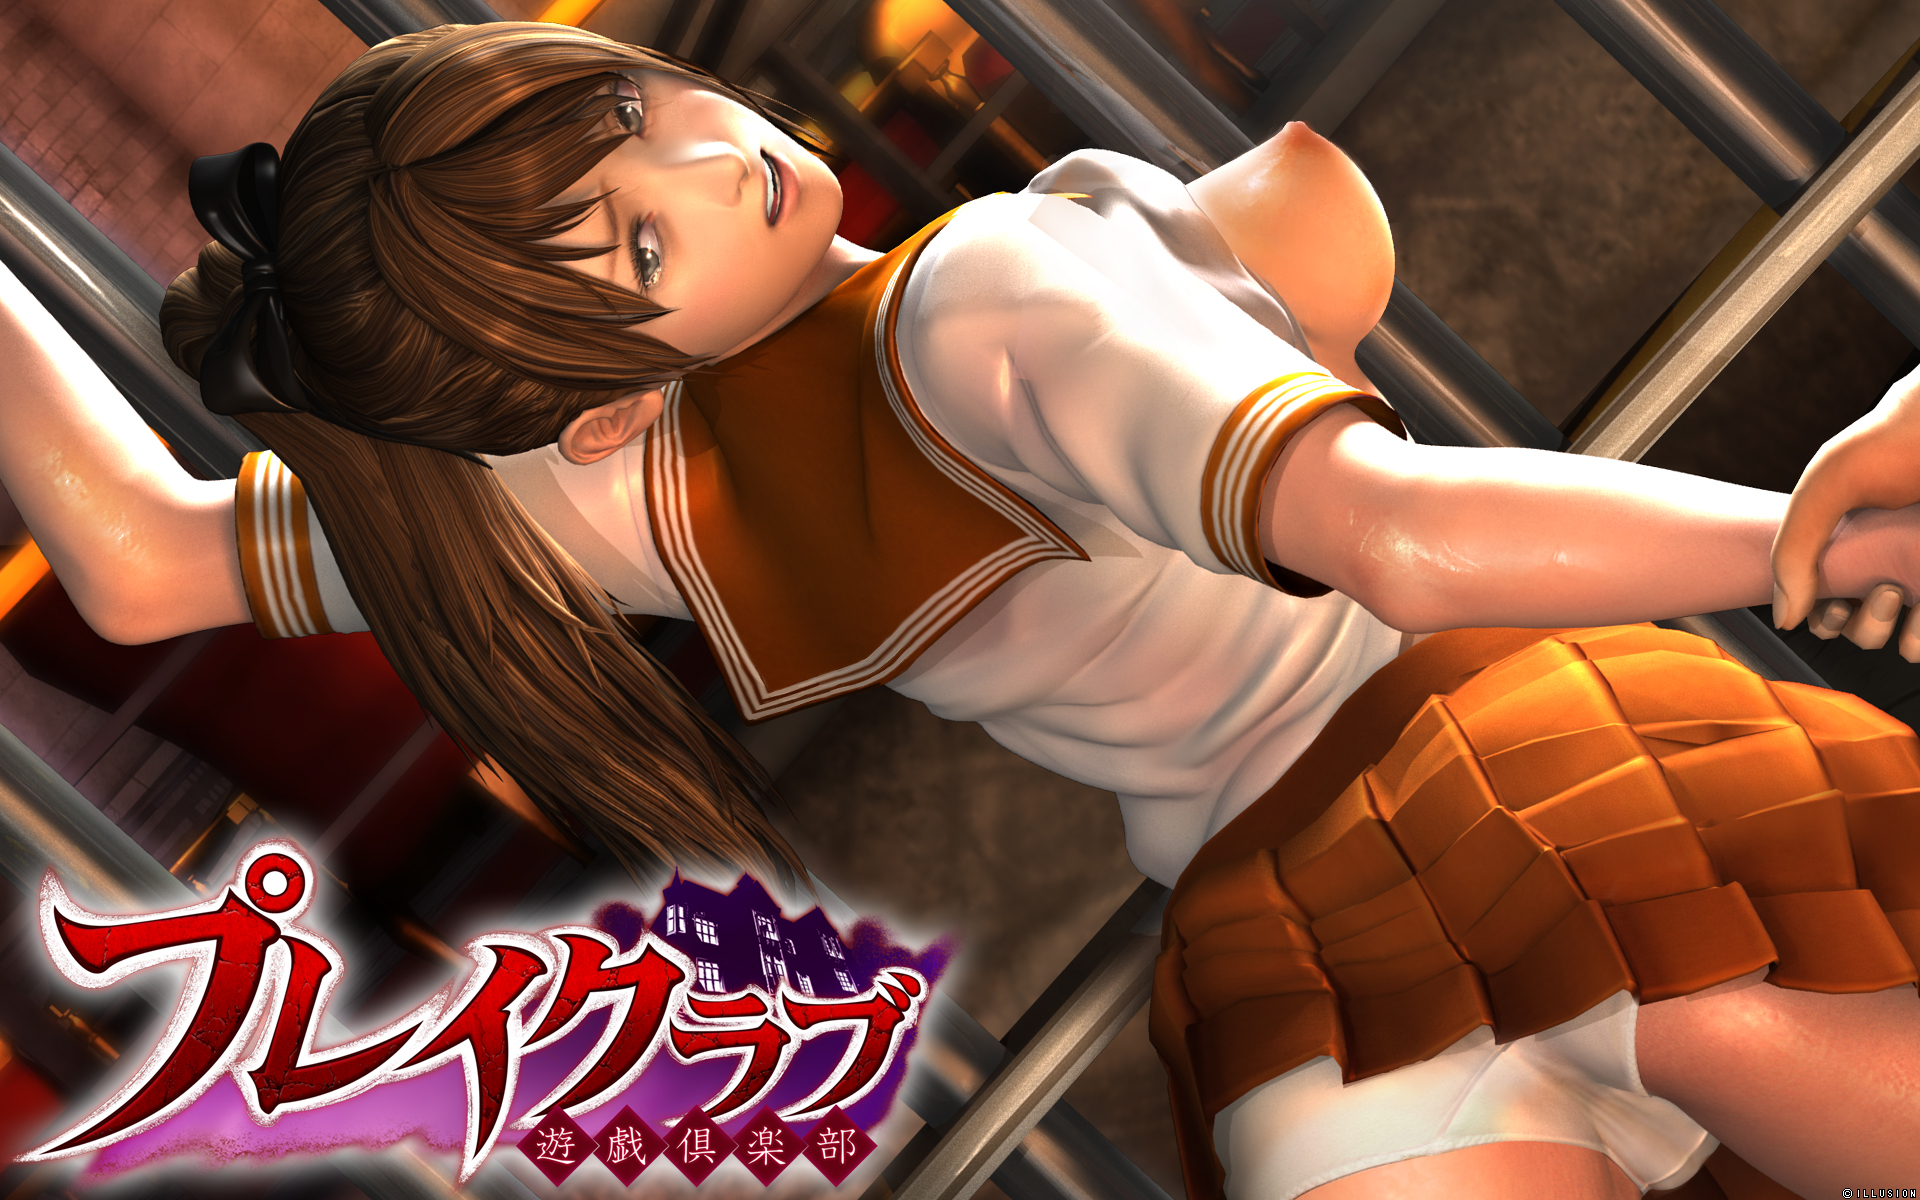 3d action rpg japanese hentai games